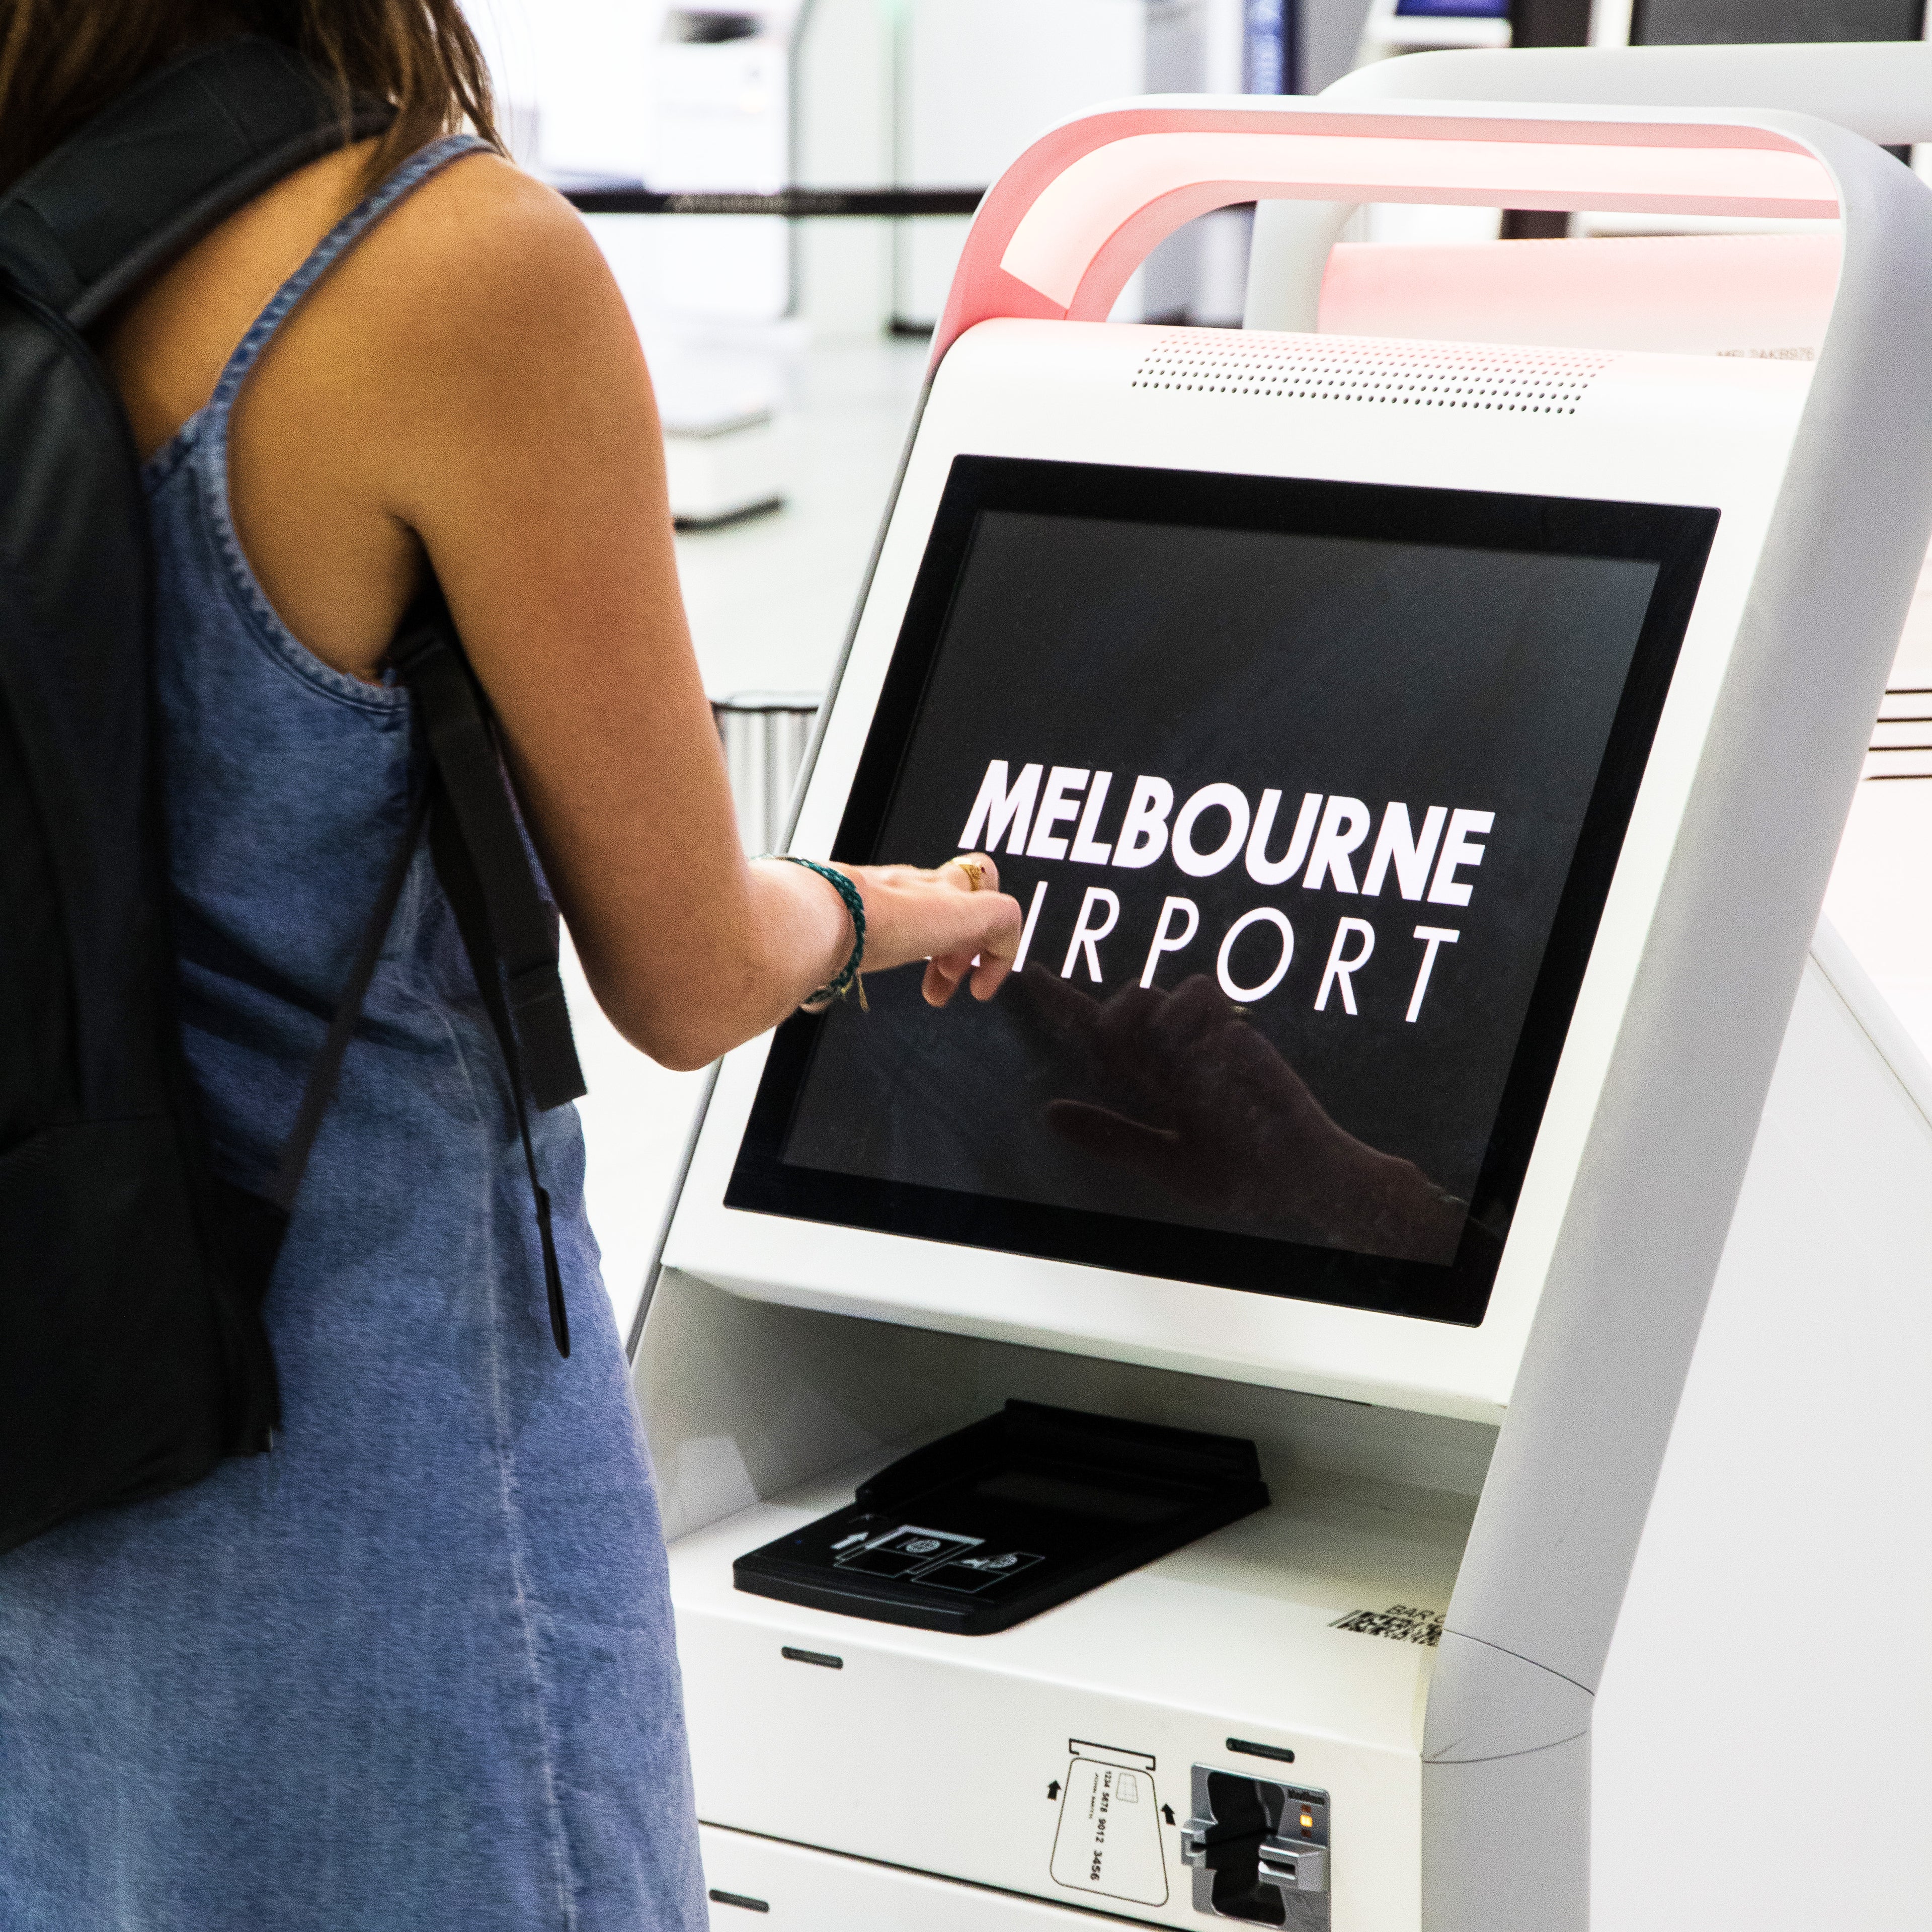 FAQs about facilities and services in Melbourne Airport